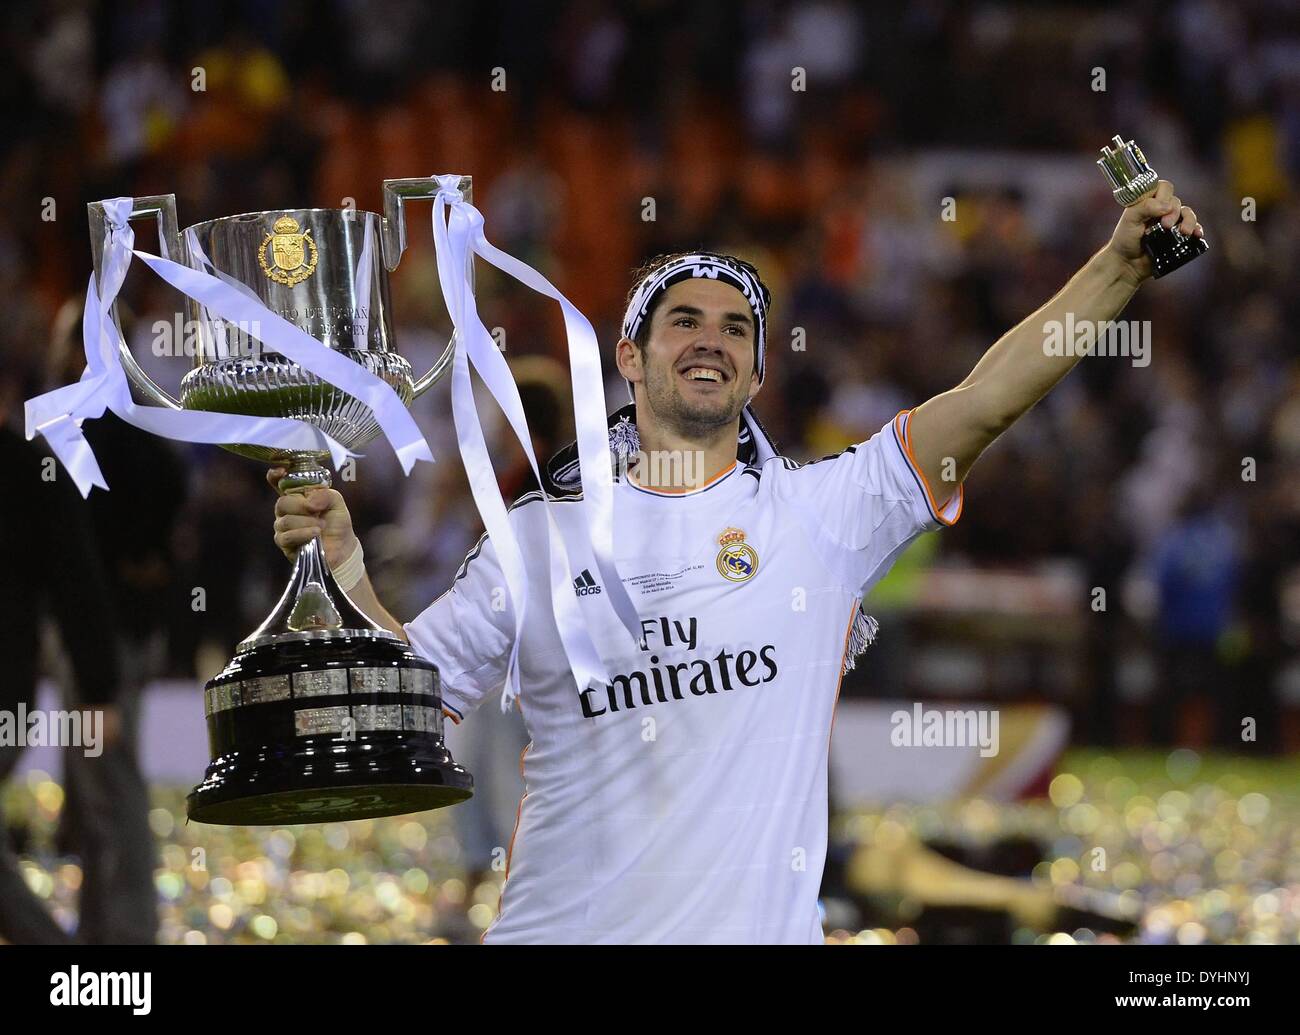 Mestalla, Valencia, Spain. 16th Apr, 2014. Copa Del Rey Cup final. Barcelona versus Real Madrid. Isco (Real Madrid) with the cup © Action Plus Sports/Alamy Live News Stock Photo